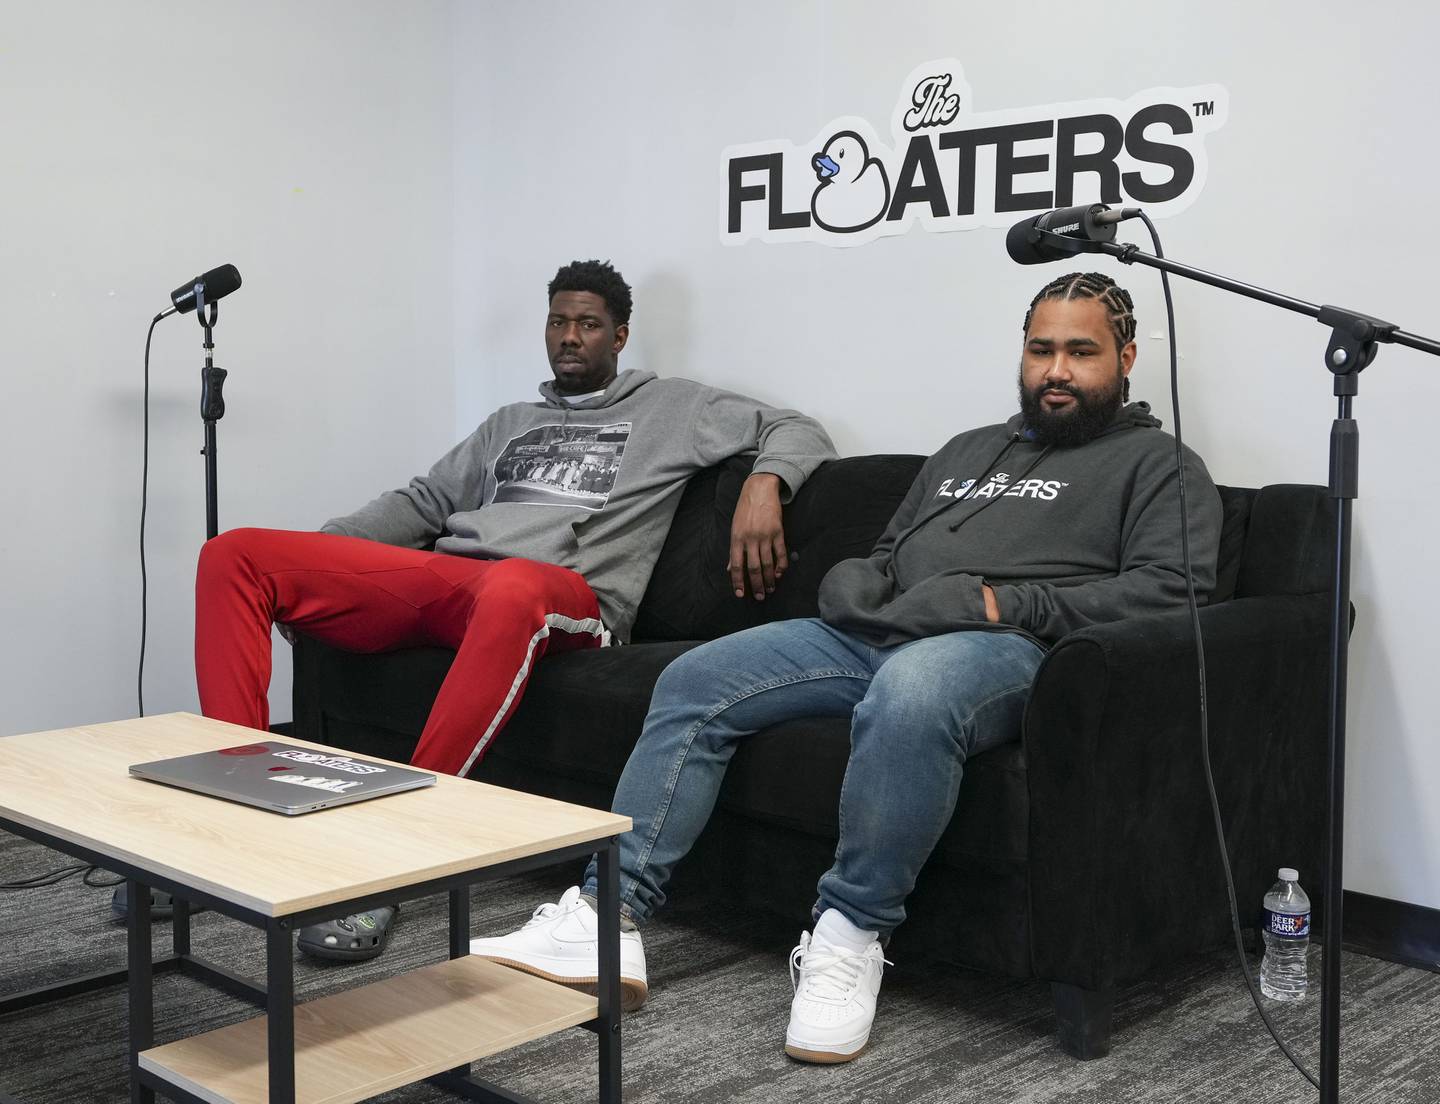 Henry Sims (left), and Devin McCoy (right) set up their versatile event space for a podcast recording session on 1010 Fleet St. in Downtown Baltimore, MD., on March 6, 2023.